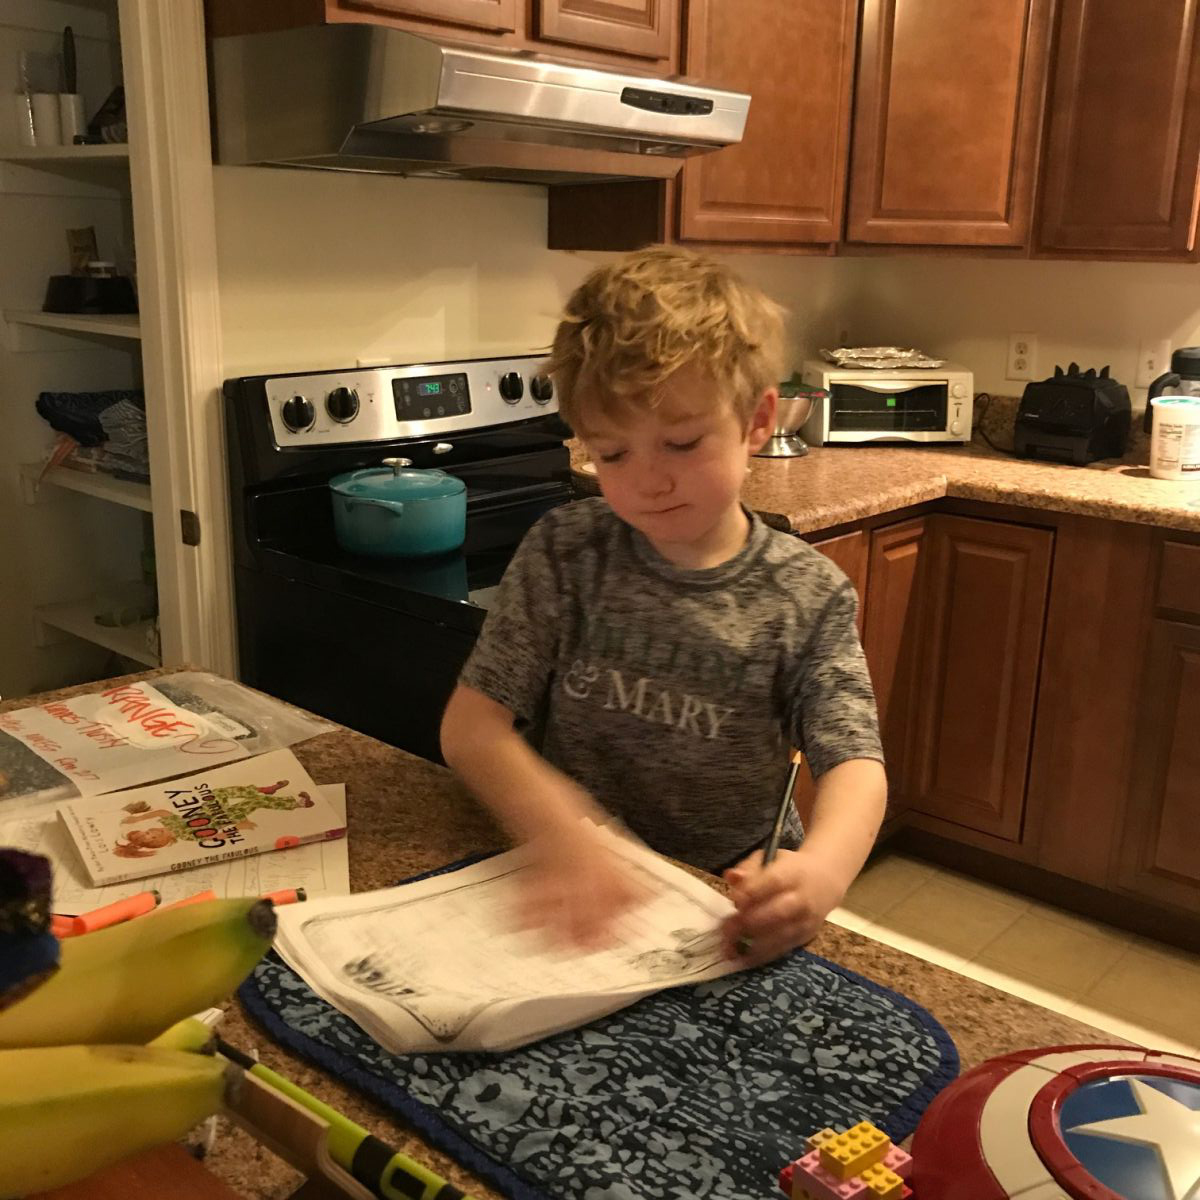 Picture of a 2nd grade boy with blond hair filling out a worksheet in a W&M shirt